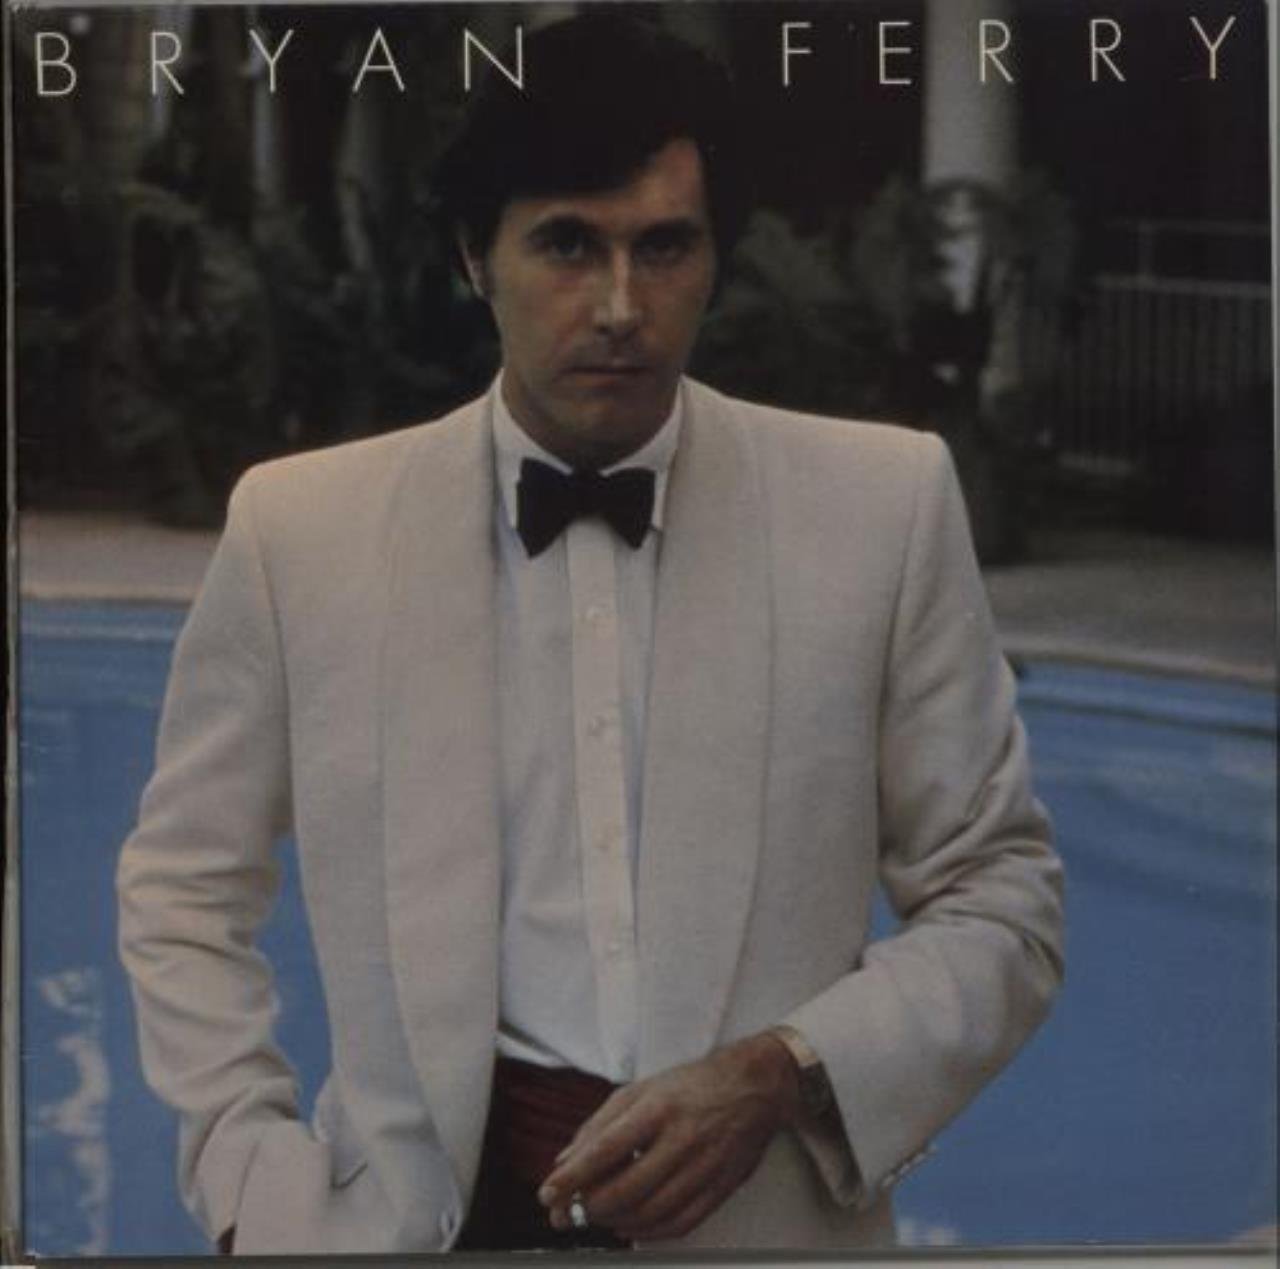 Bryan Ferry - Another Time Another Place |  Vinyl LP | Bryan Ferry - Another Time Another Place (LP) | Records on Vinyl